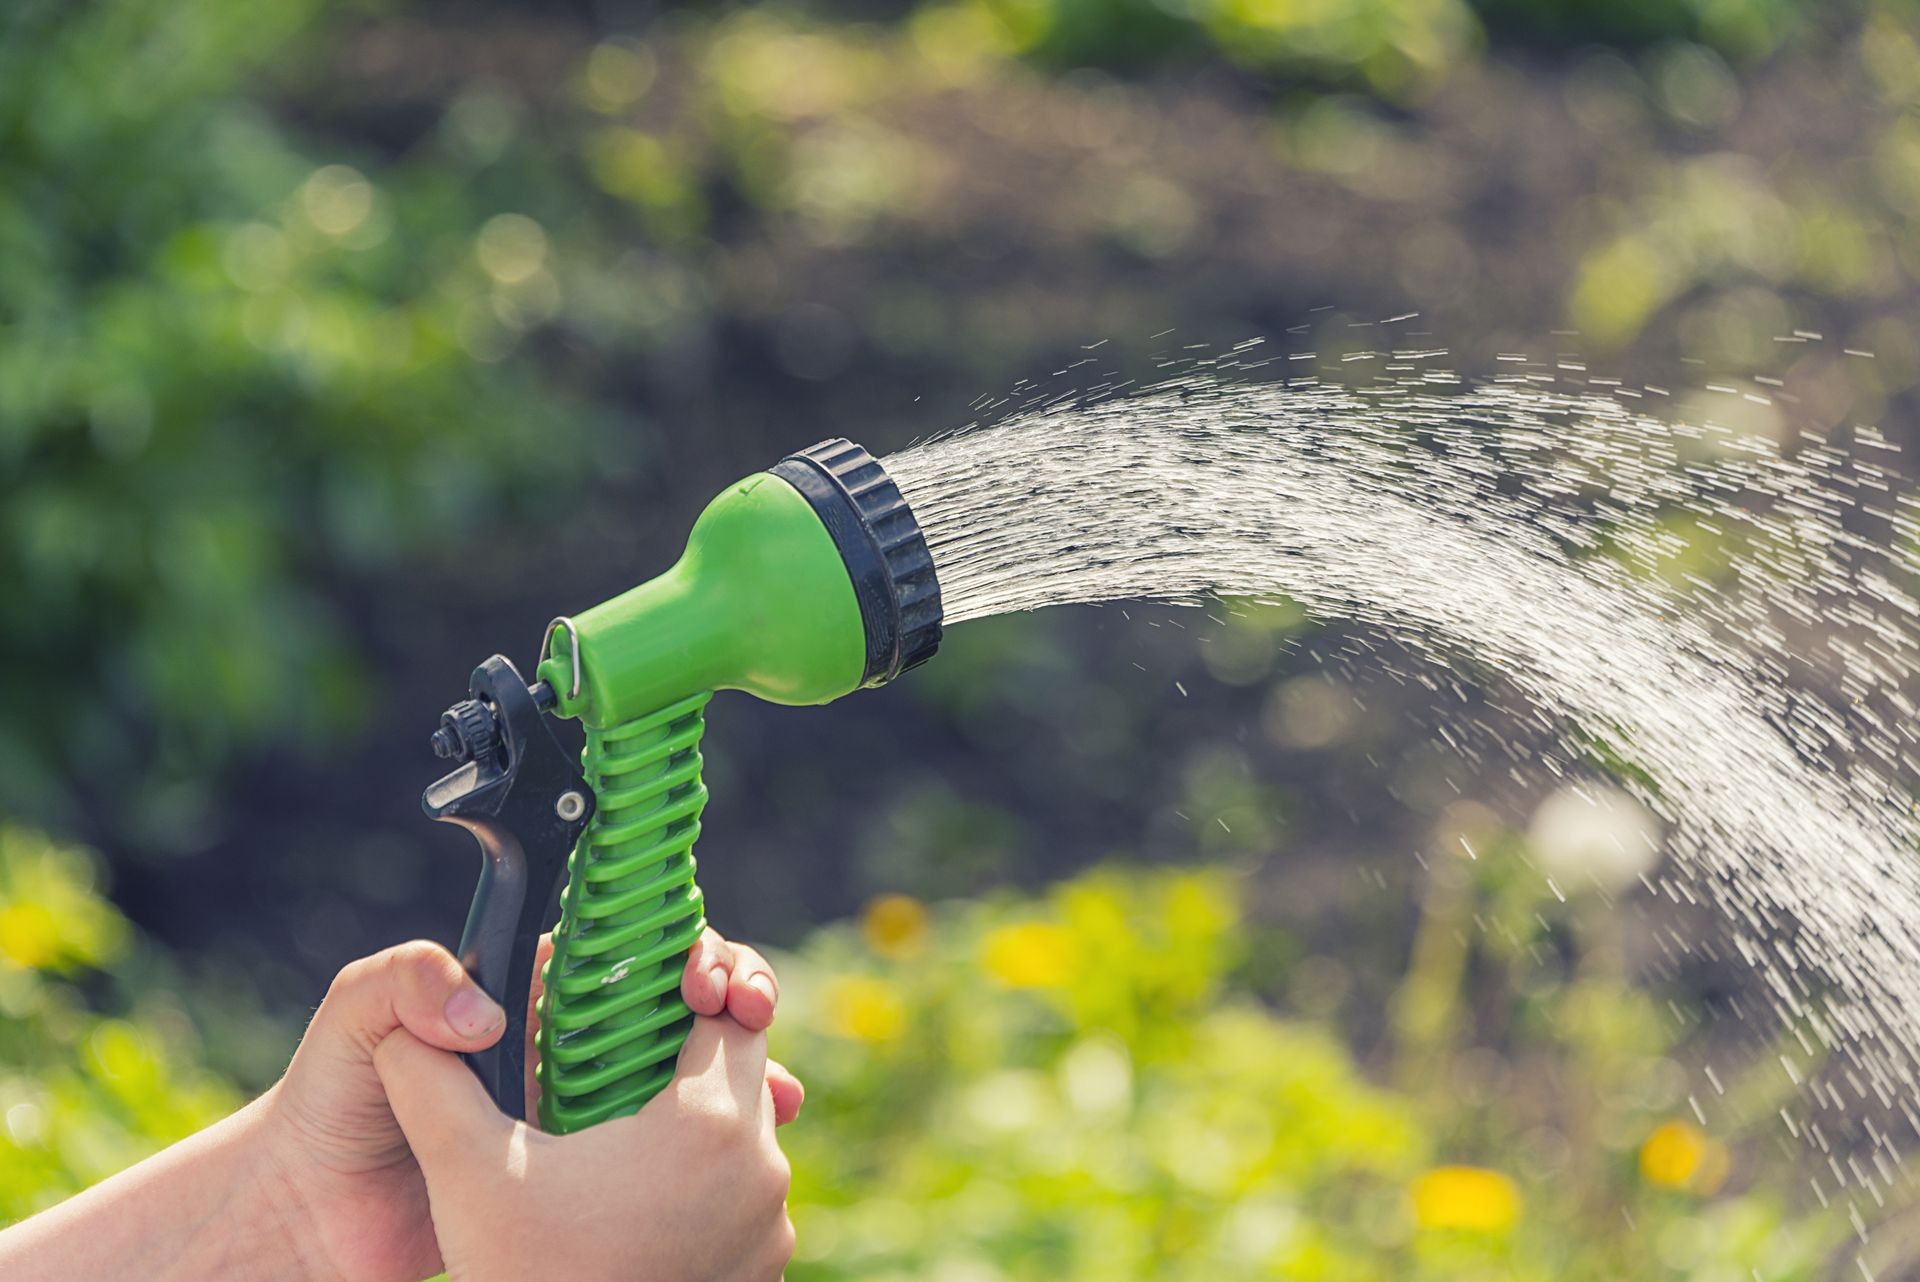 Hands with a green hose pour water on the garden in bright weather